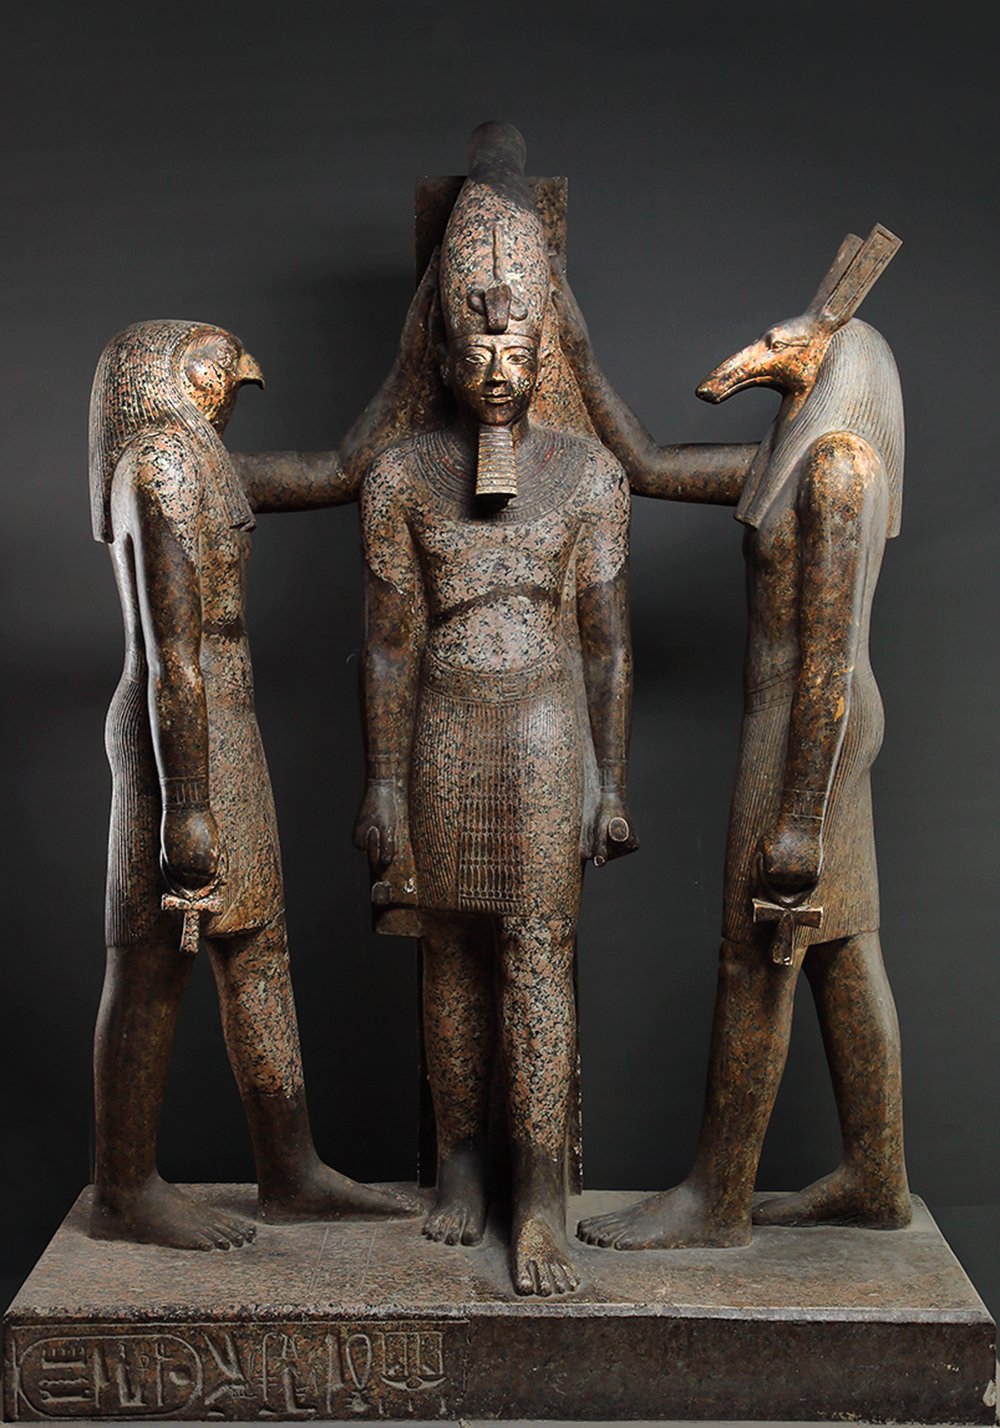 The image shows a statue of an ancient Egyptian pharaoh, Ramesses III, with two deities on either side. The pharaoh is standing in the center. The deities on either side of the pharaoh are Horus and Set. Horus is on the left side of the pharaoh and is depicted as a falcon-headed man. Set is on the right side of the pharaoh and is depicted as a jackal-headed man. The statue is made of stone and is in a dark gray color. The background is black.